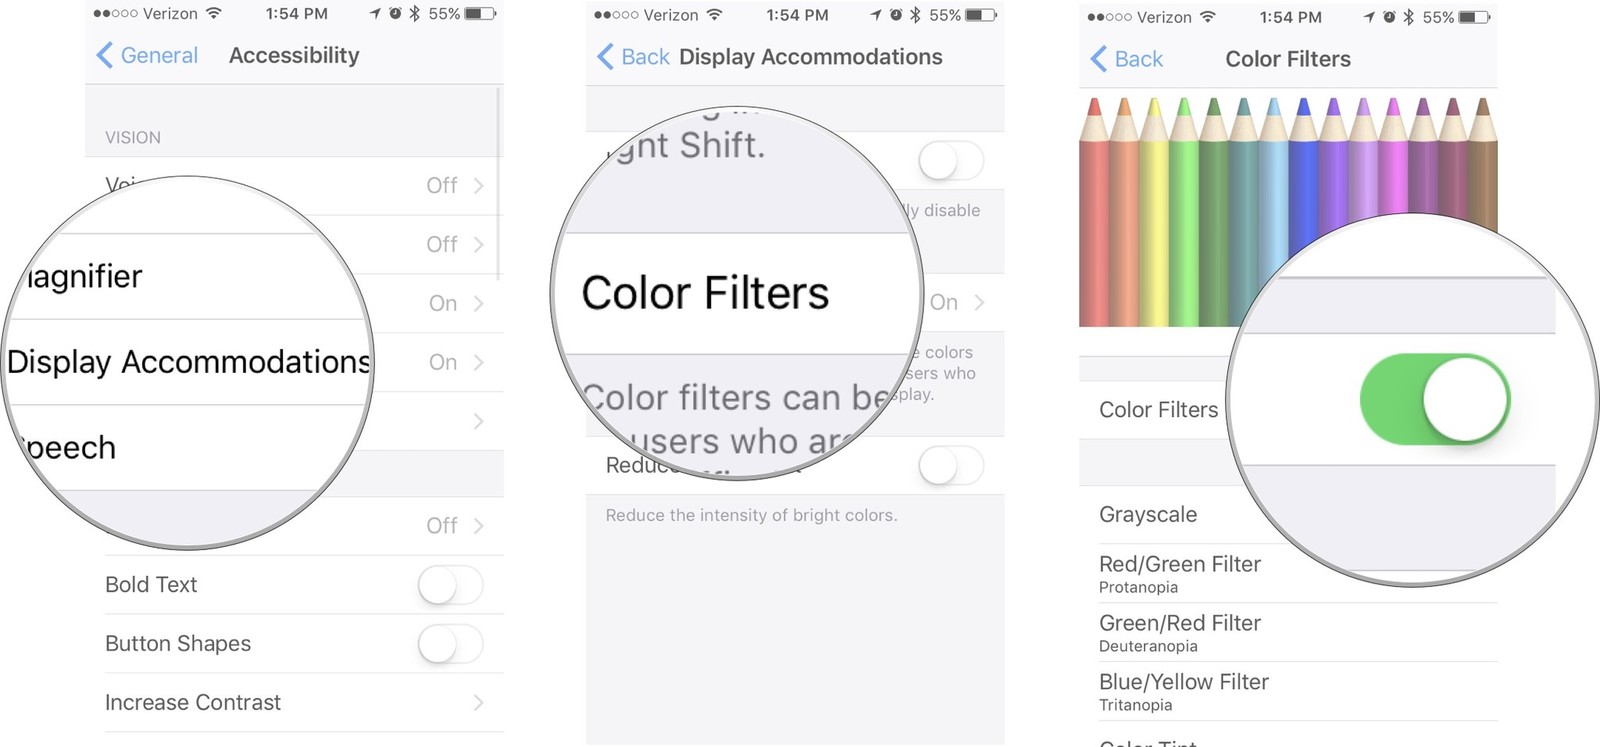 How to activate grayscale color filter on iPhone